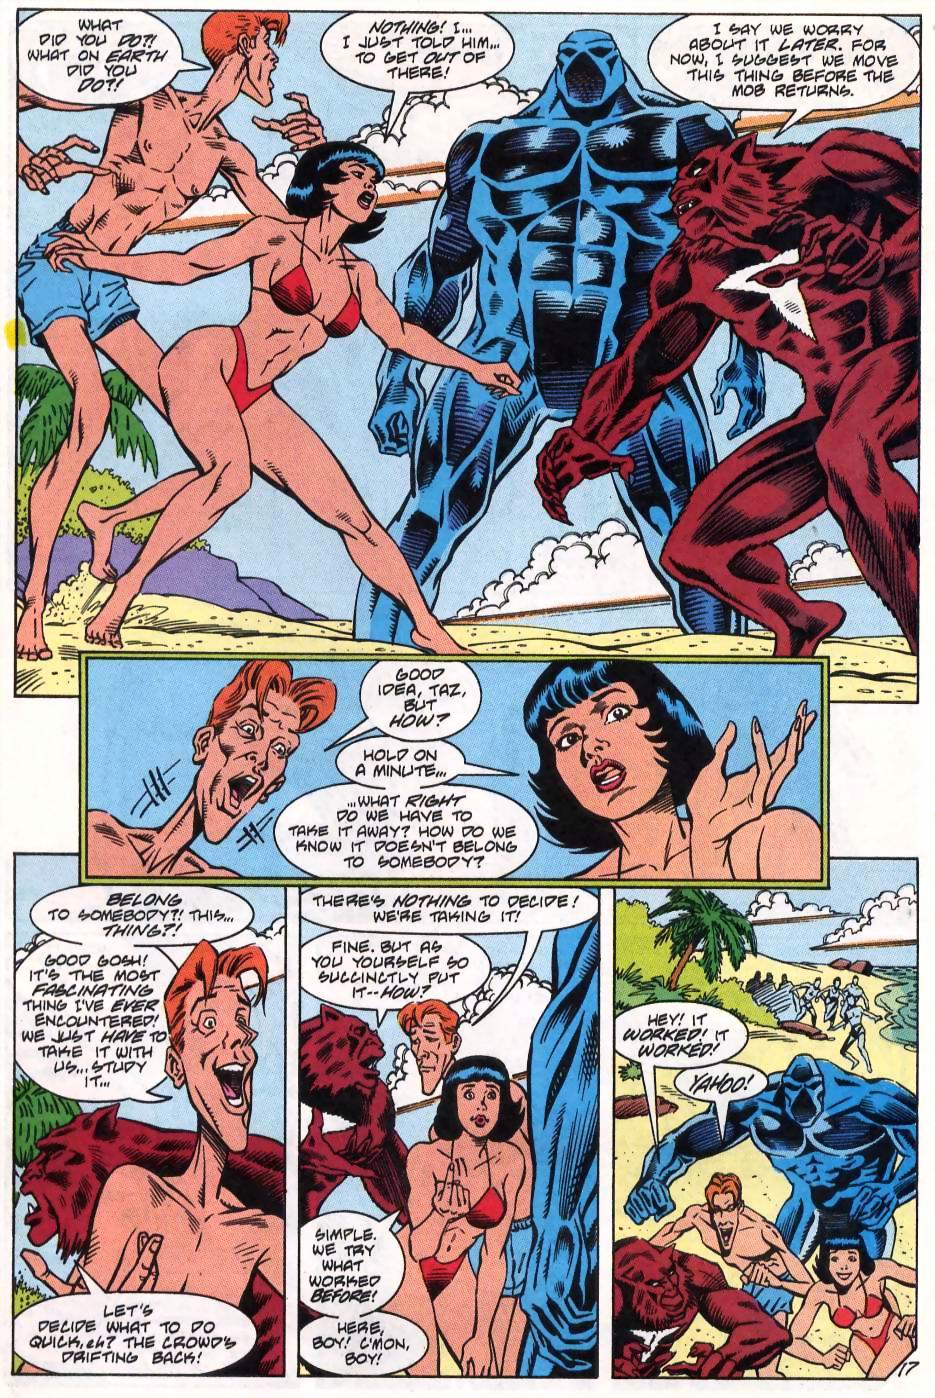 Justice League International (1993) 53 Page 17